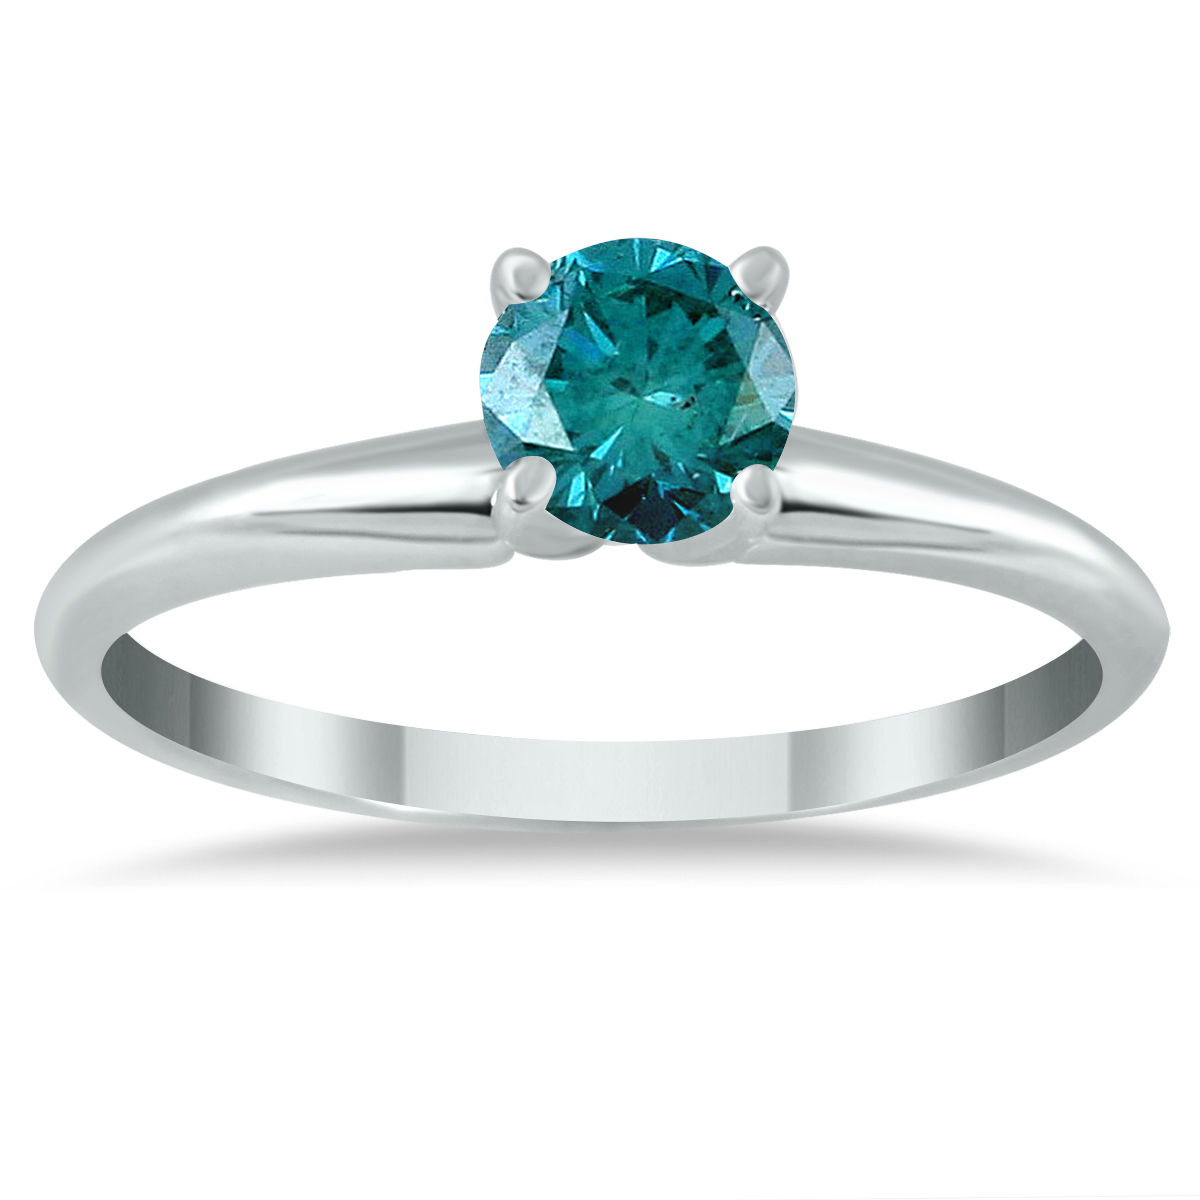 Image of 1/3 Carat TW Round Blue Diamond Solitaire Ring in 14k White Gold